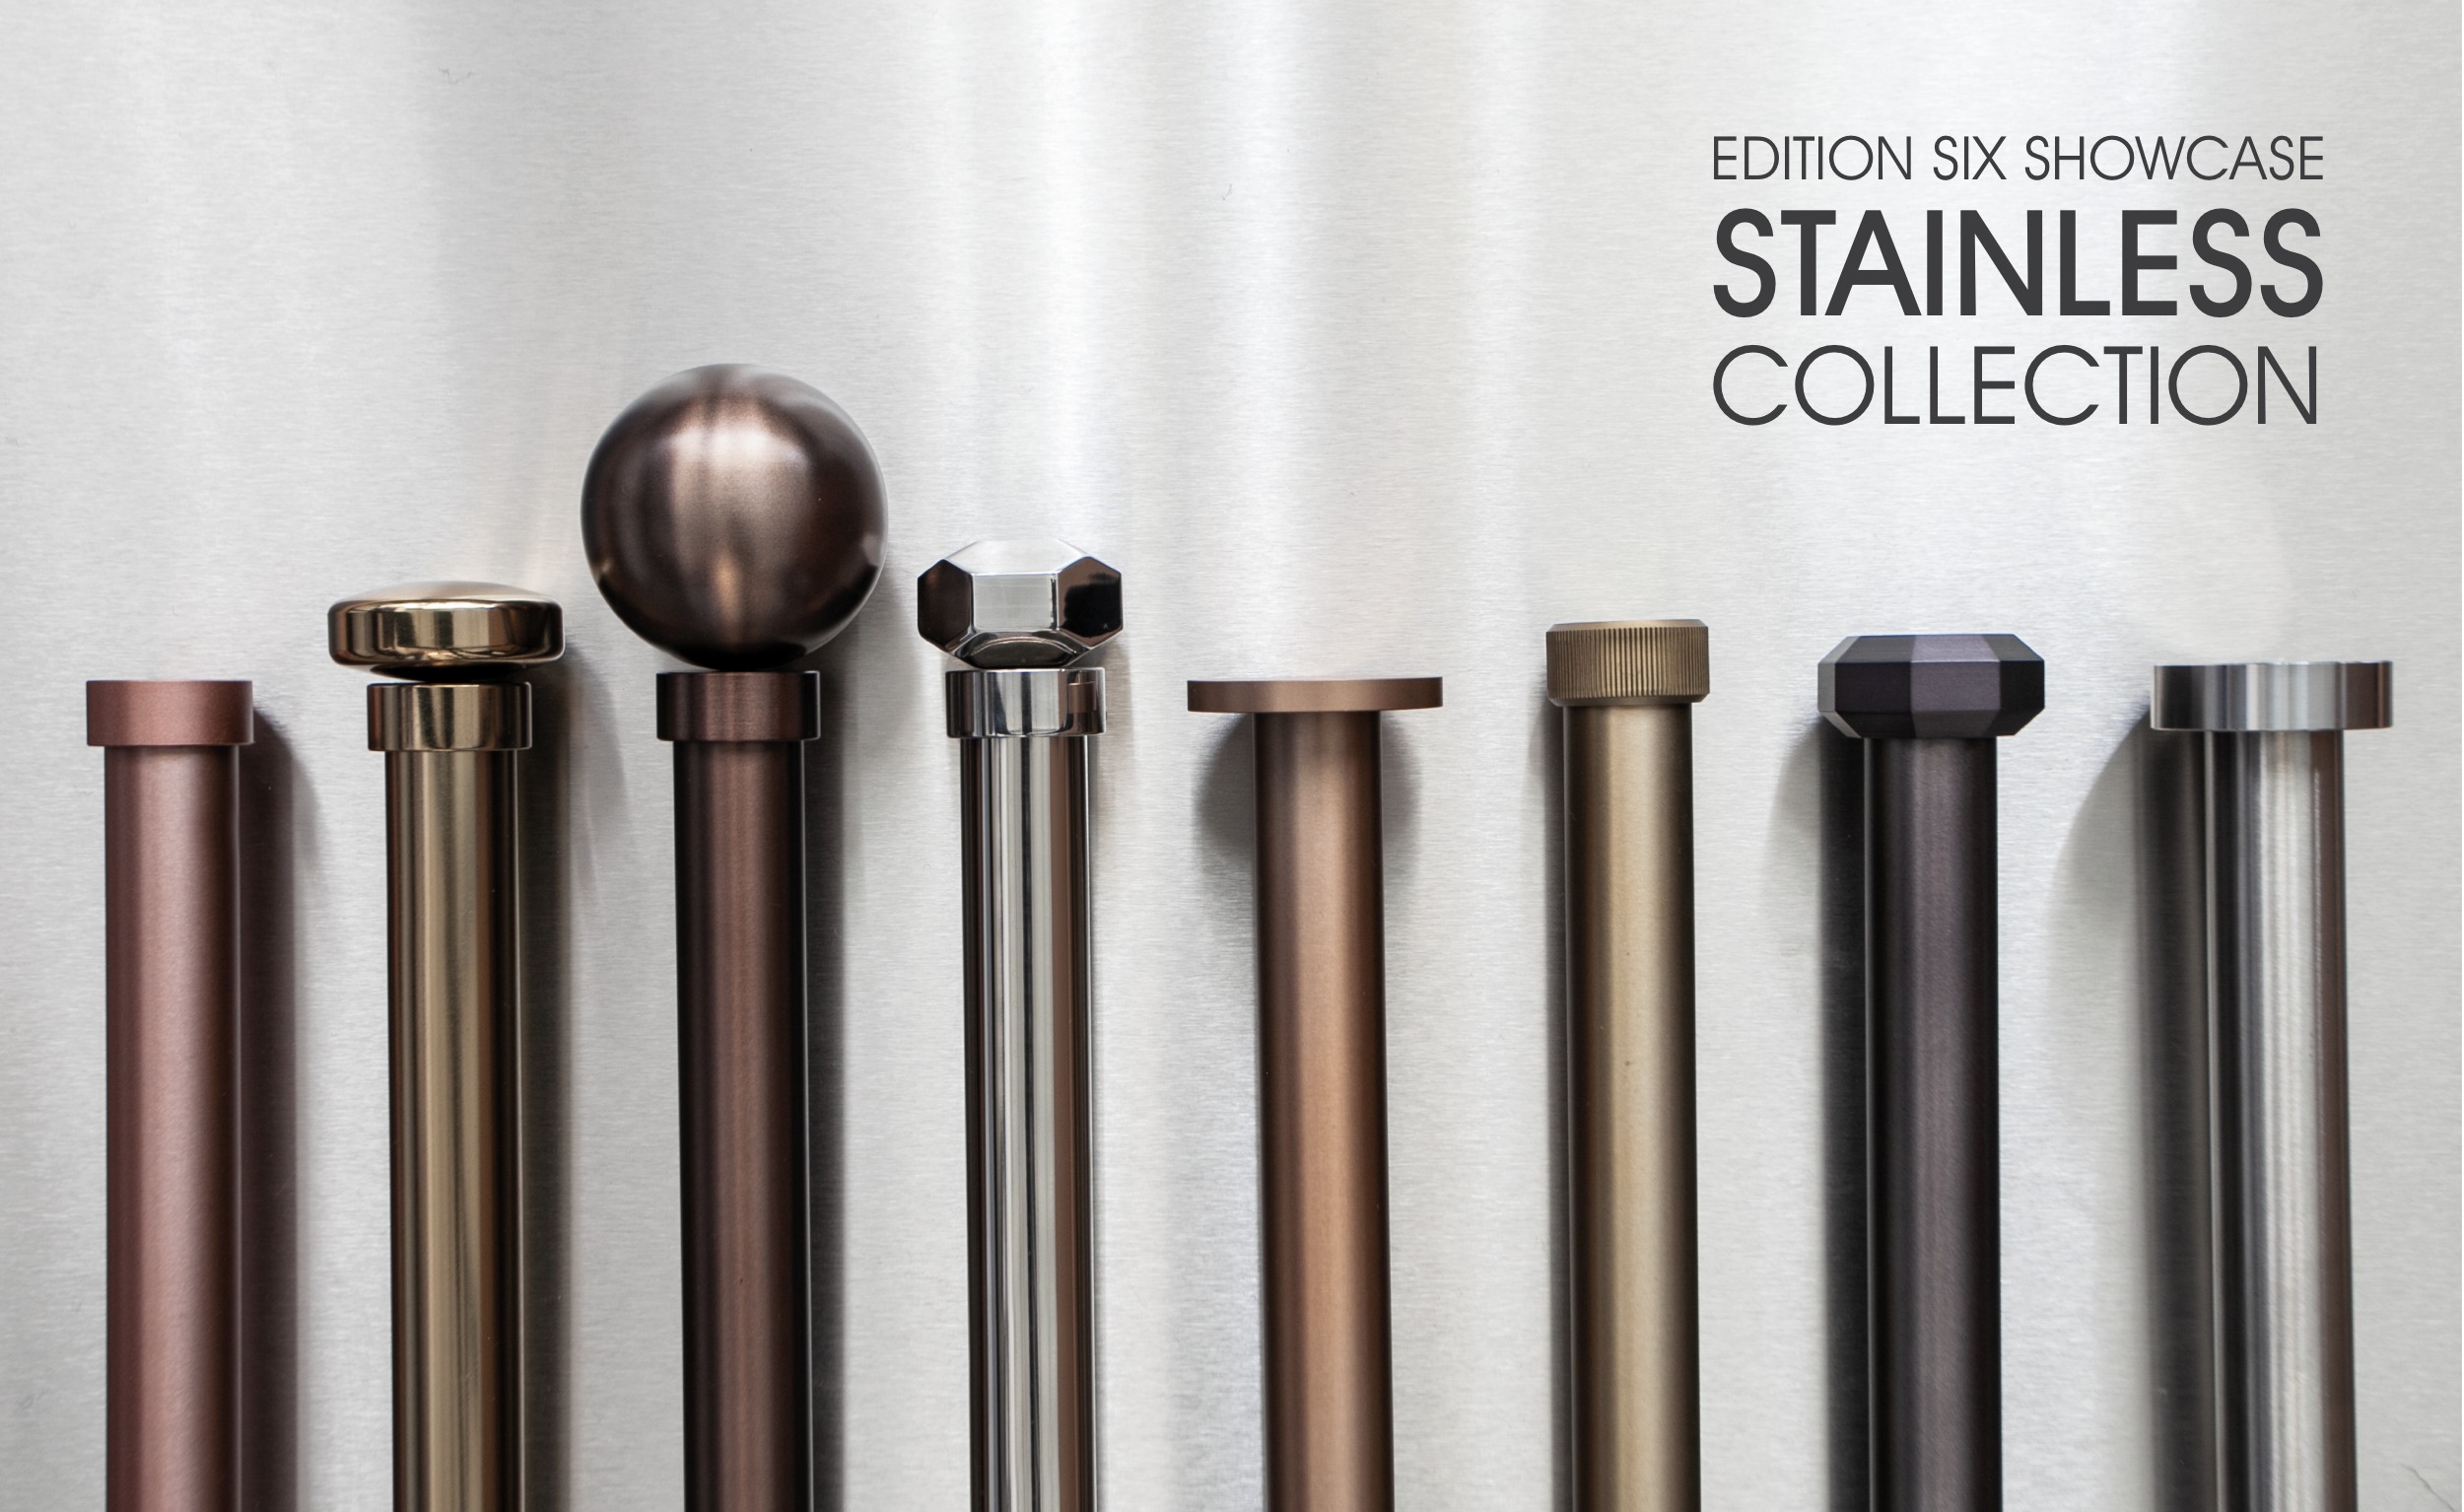 Designer curtain poles made to measure in various finishes